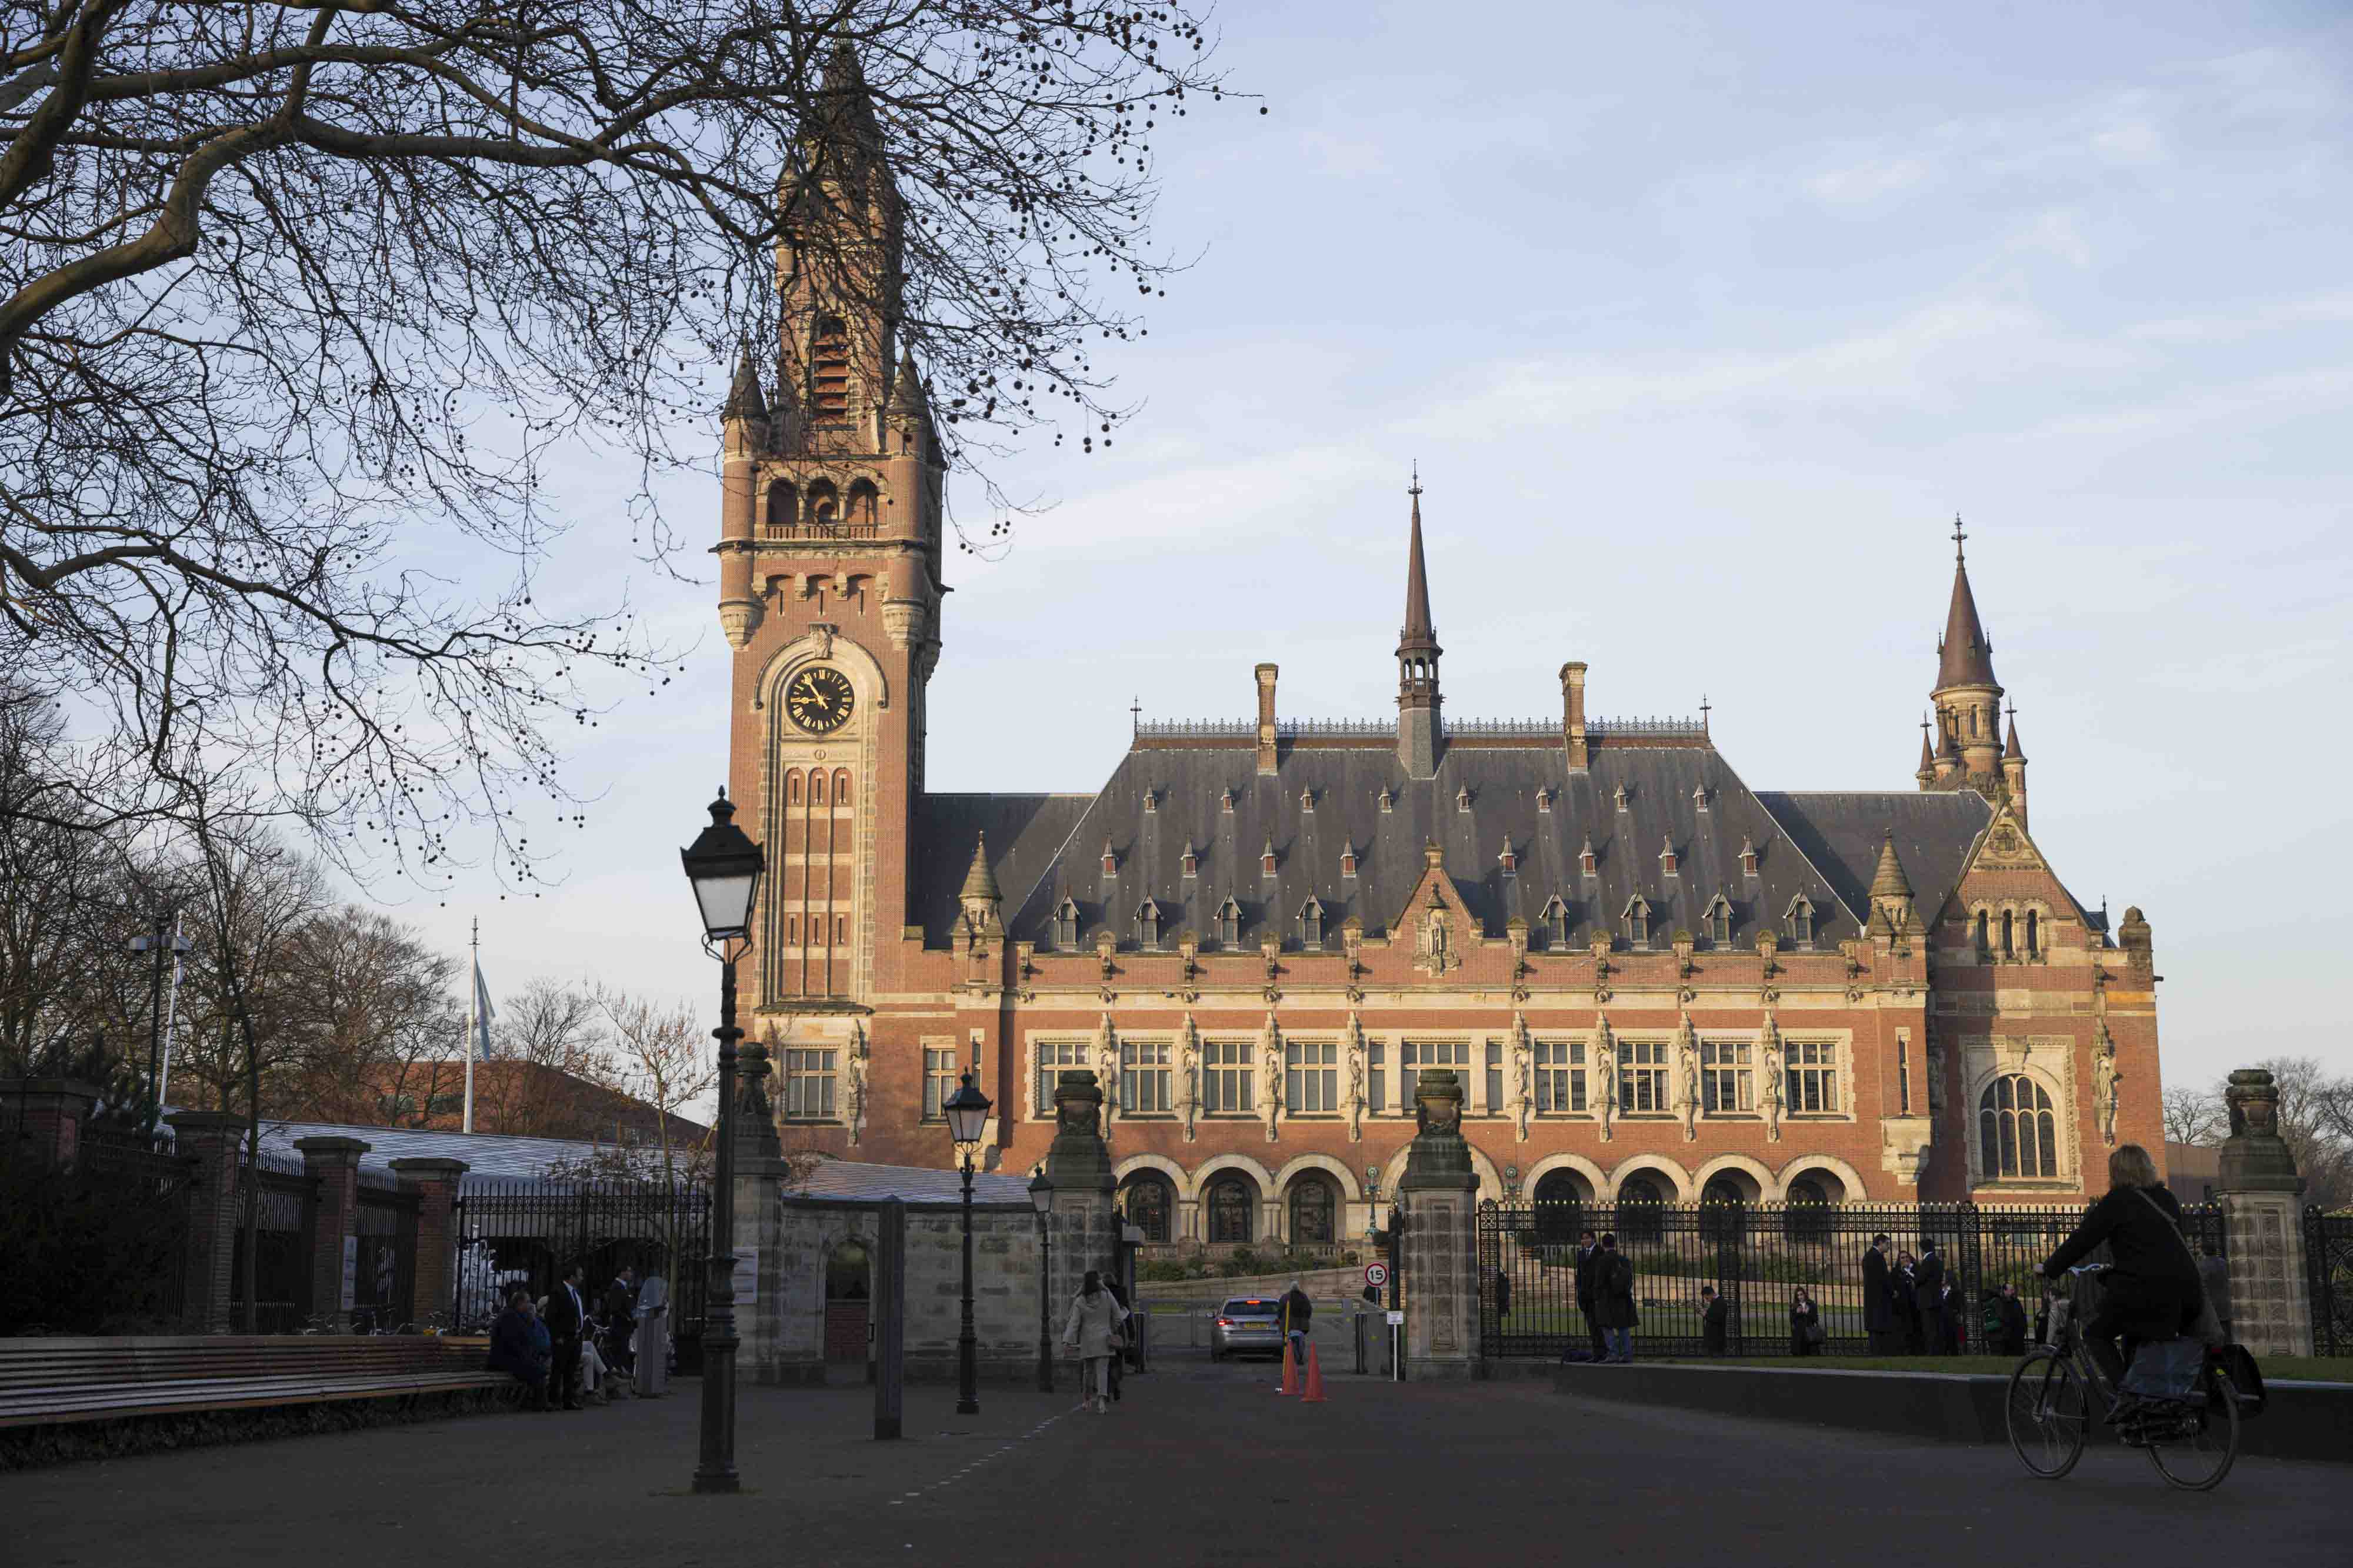 The International Court of Justice, or World Court, in The Hague, Netherlands